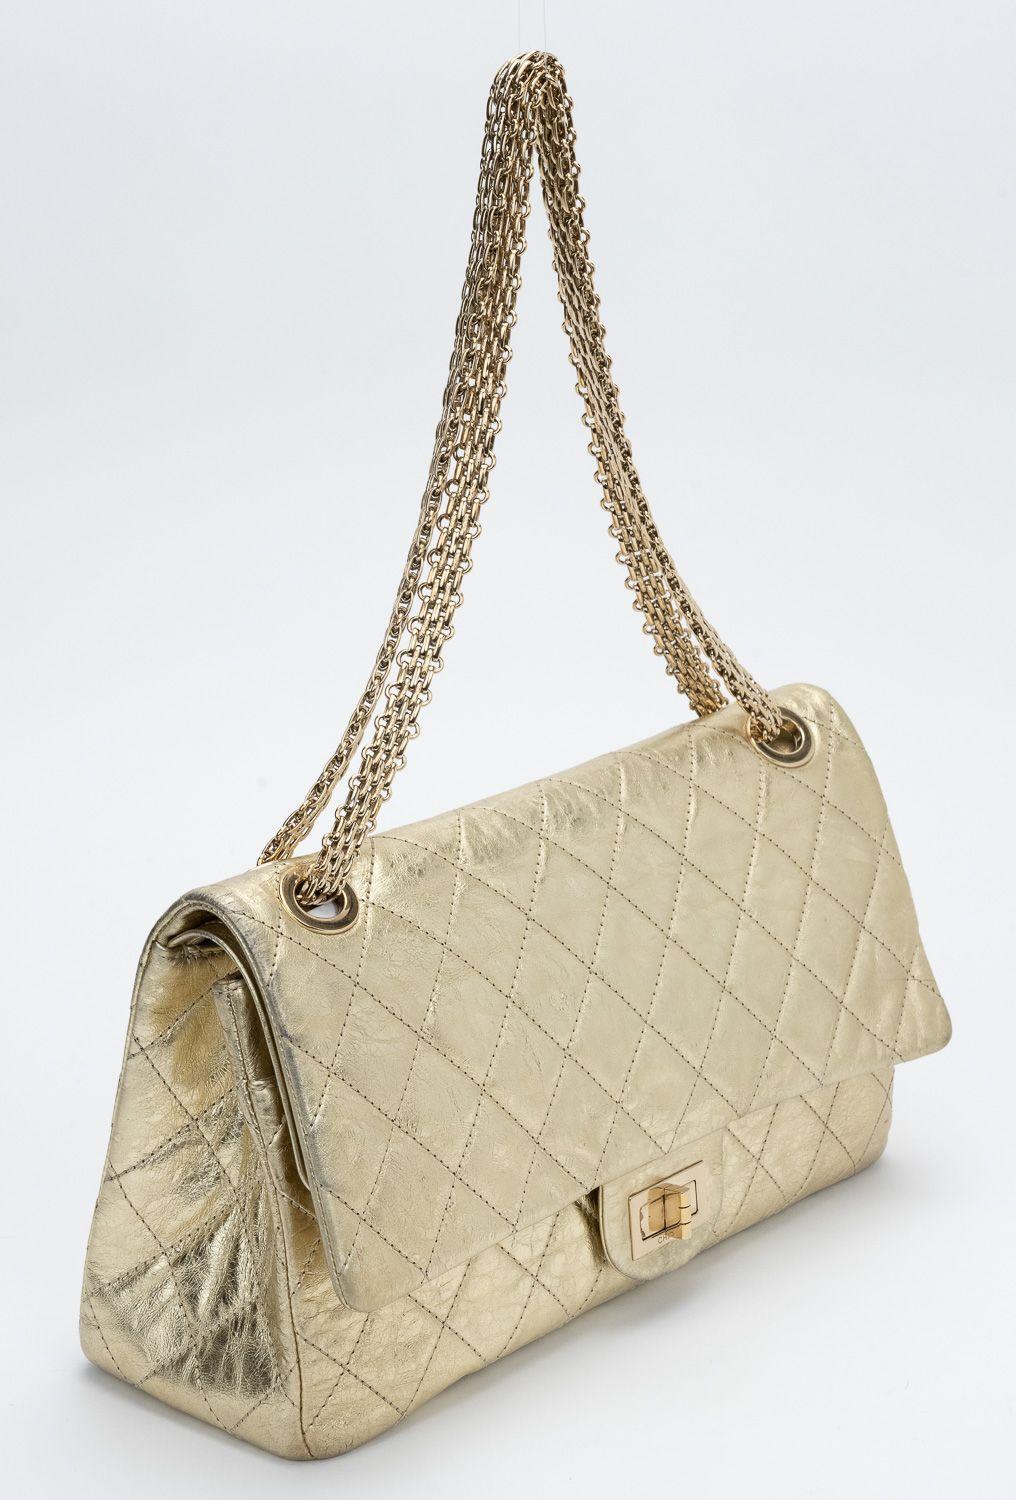 Chanel Gold Metallic Maxi Reissue Flap In Excellent Condition For Sale In West Hollywood, CA